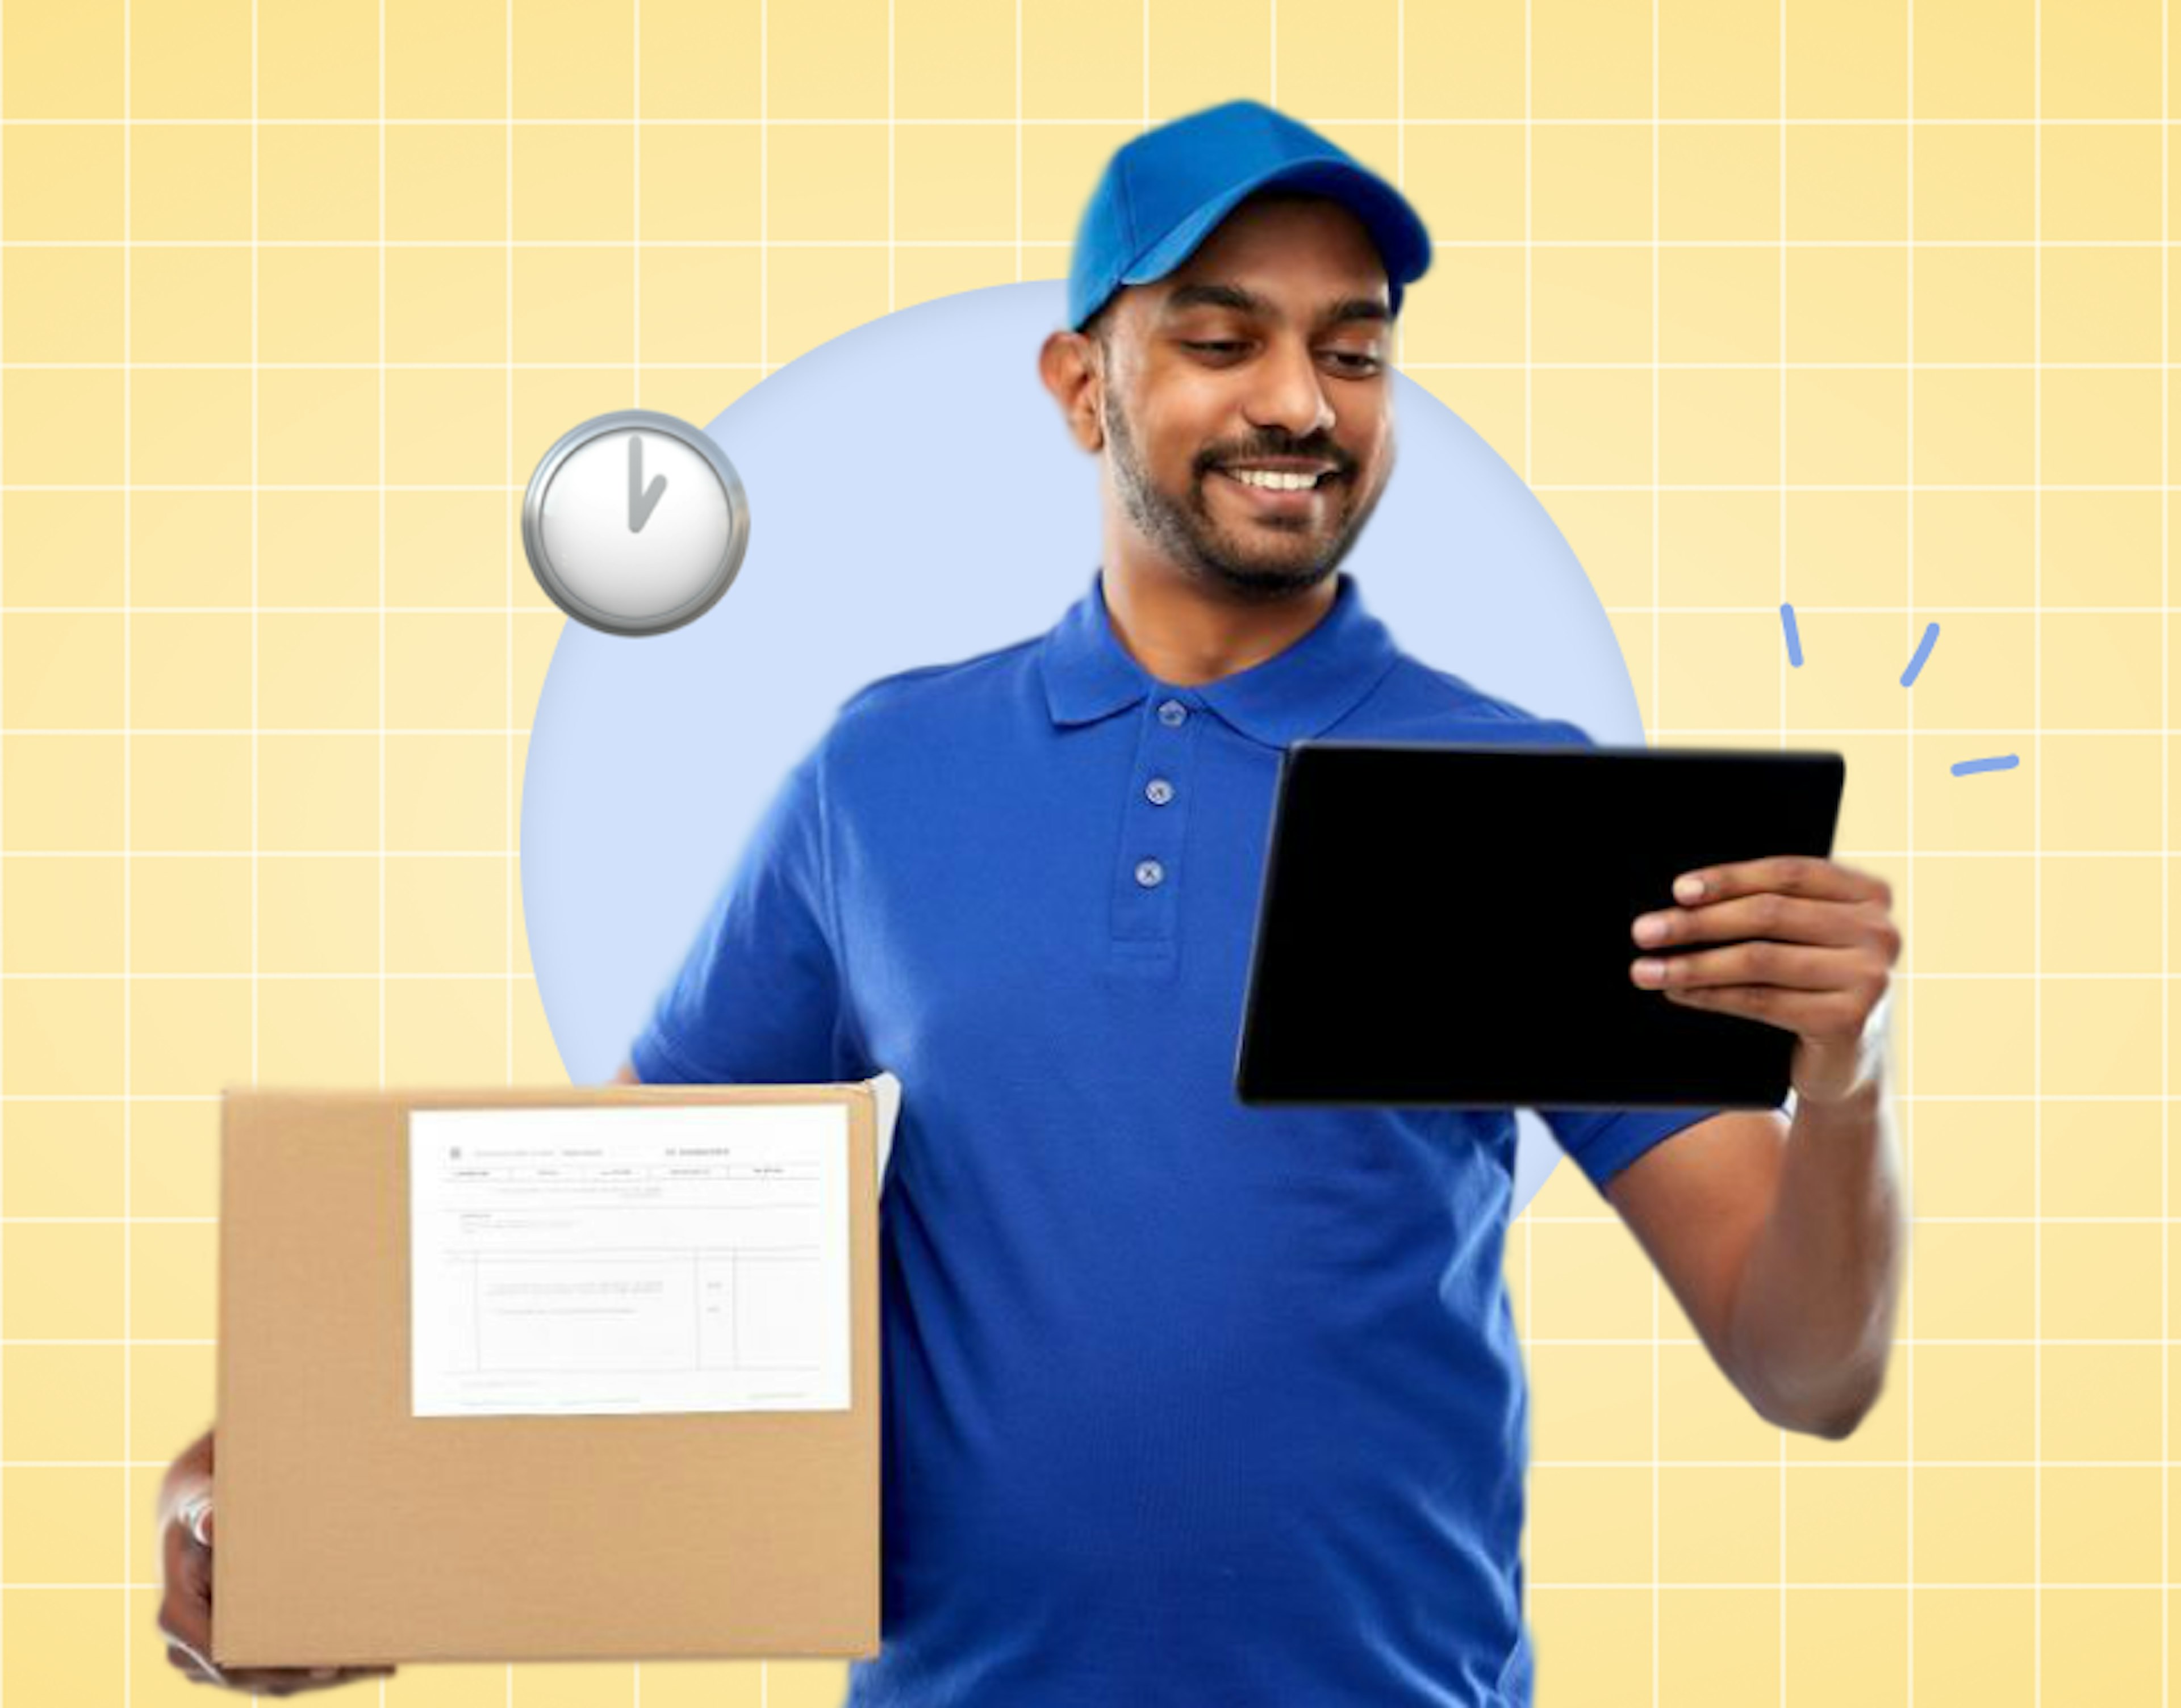 Top half of a male delivery driver in a blue top, holding a tablet device on his left hand, and a cardboard box in his left hand